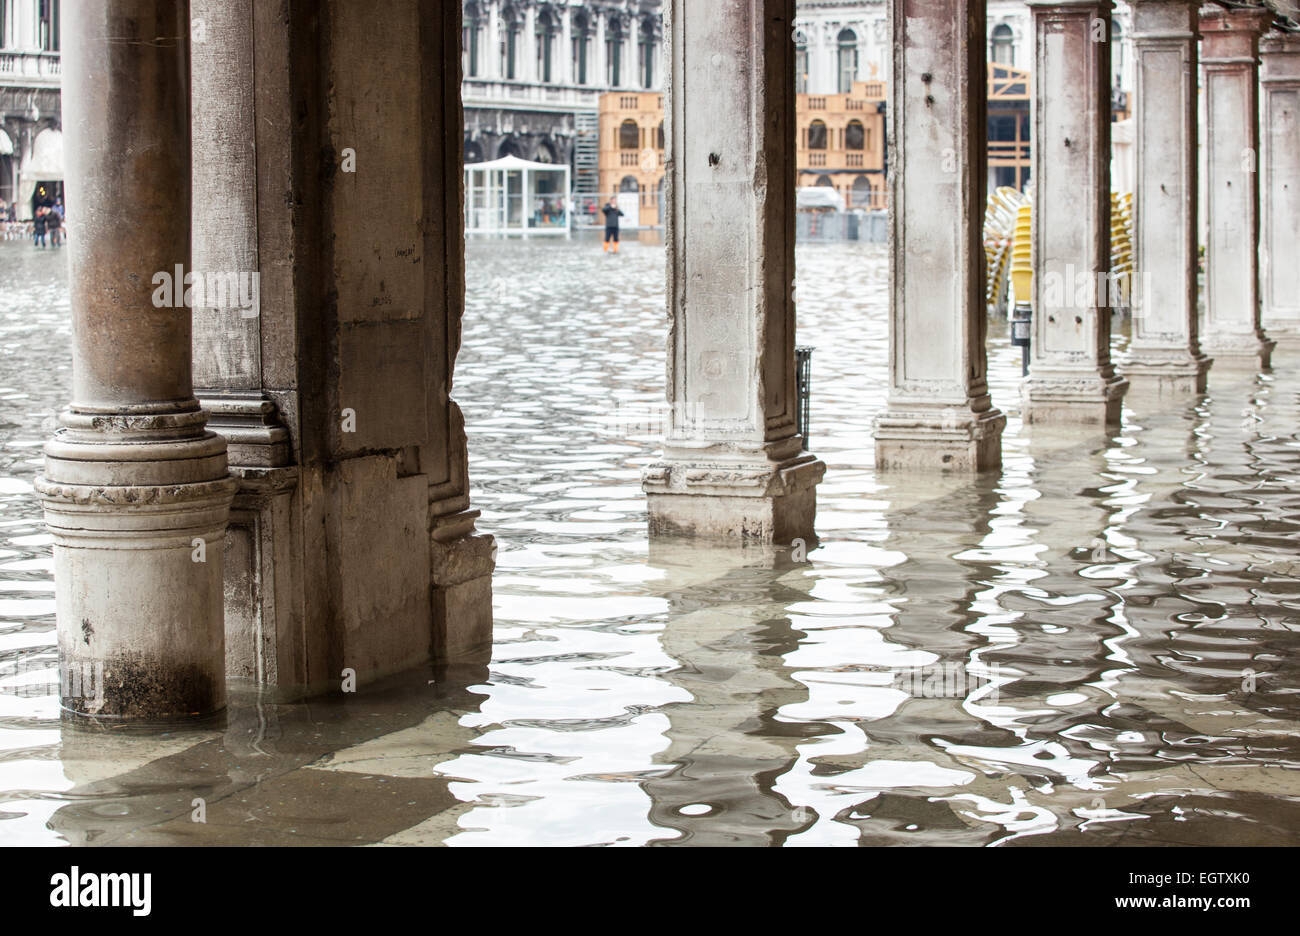 View of the arcades of the Piazza San Marco with high water in Venice, Italy. Stock Photo